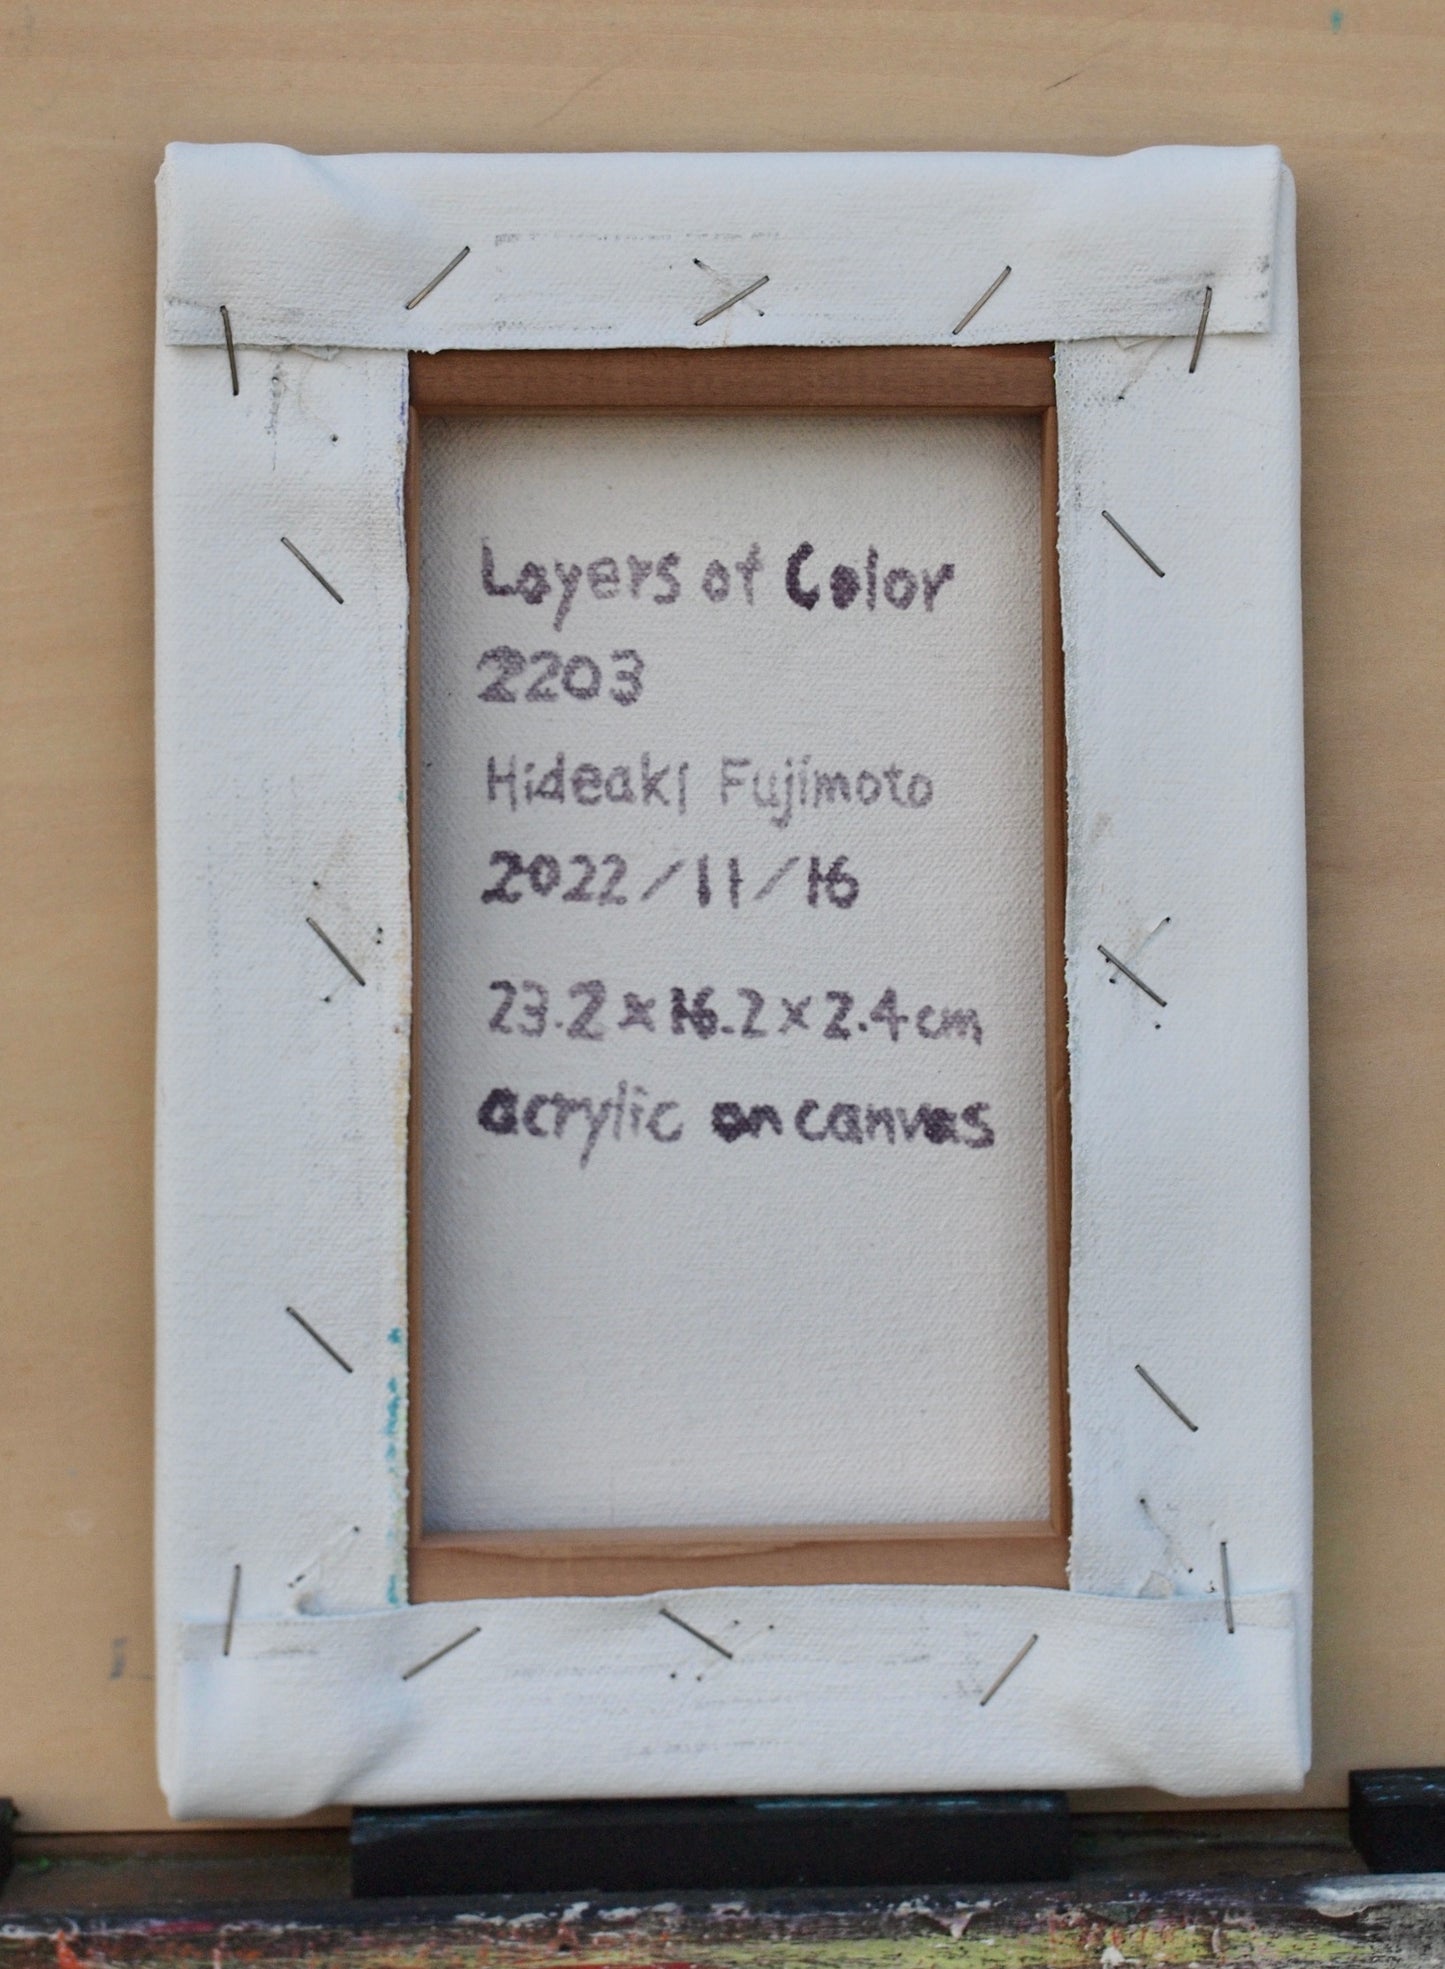 Layers of Color 2203 / 藤本英明